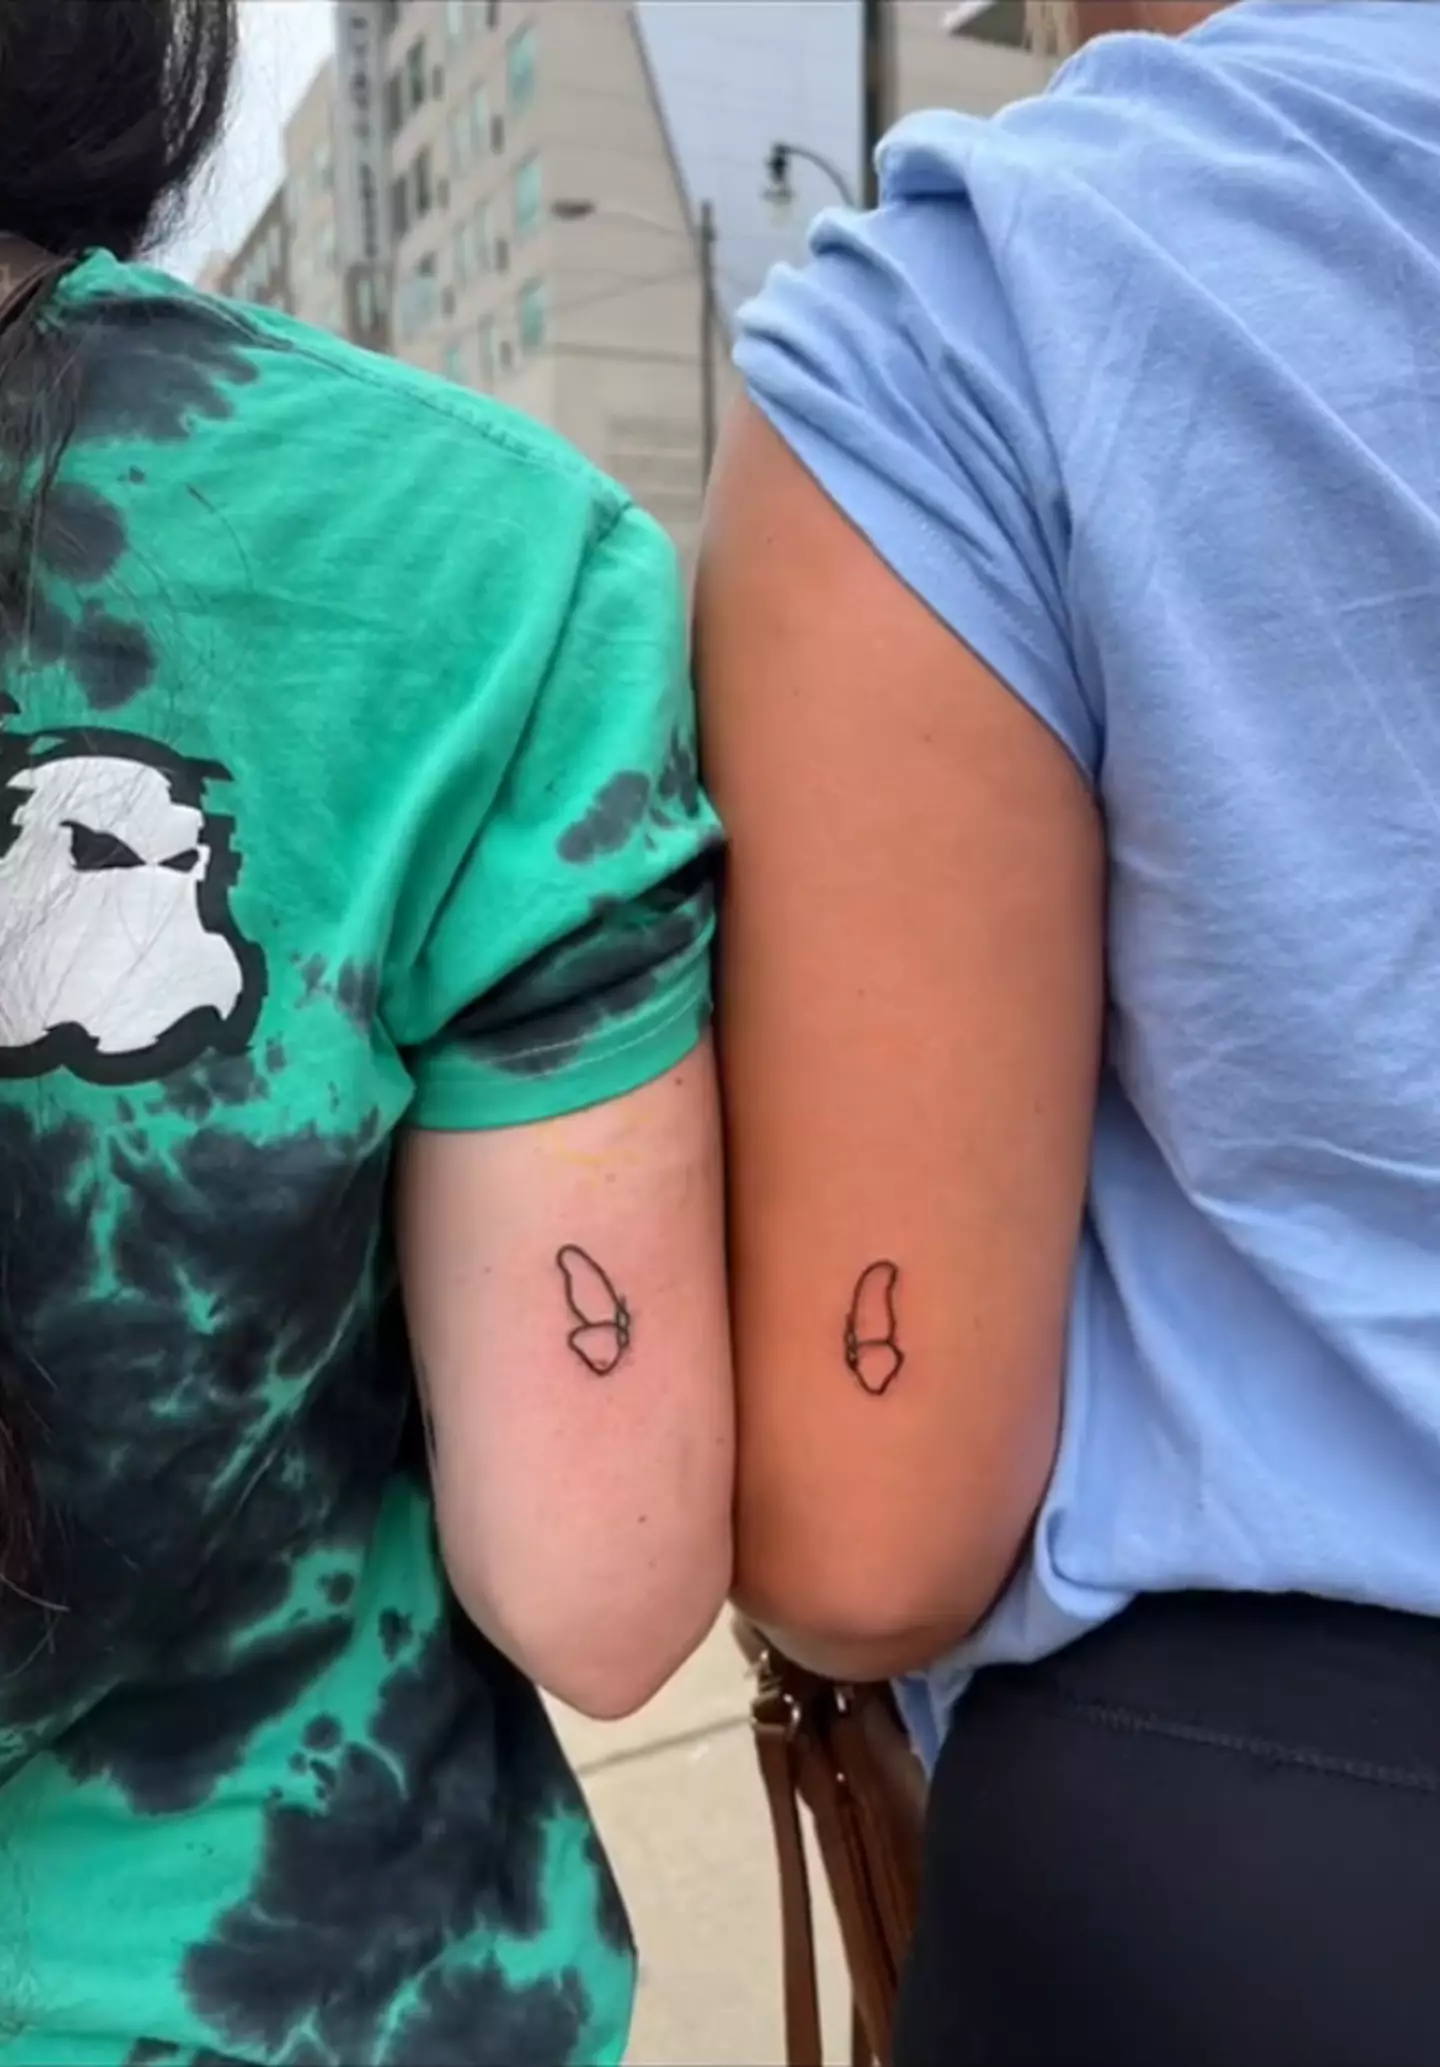 A TikTok user was left in tears after getting matching tattoos with a pal.